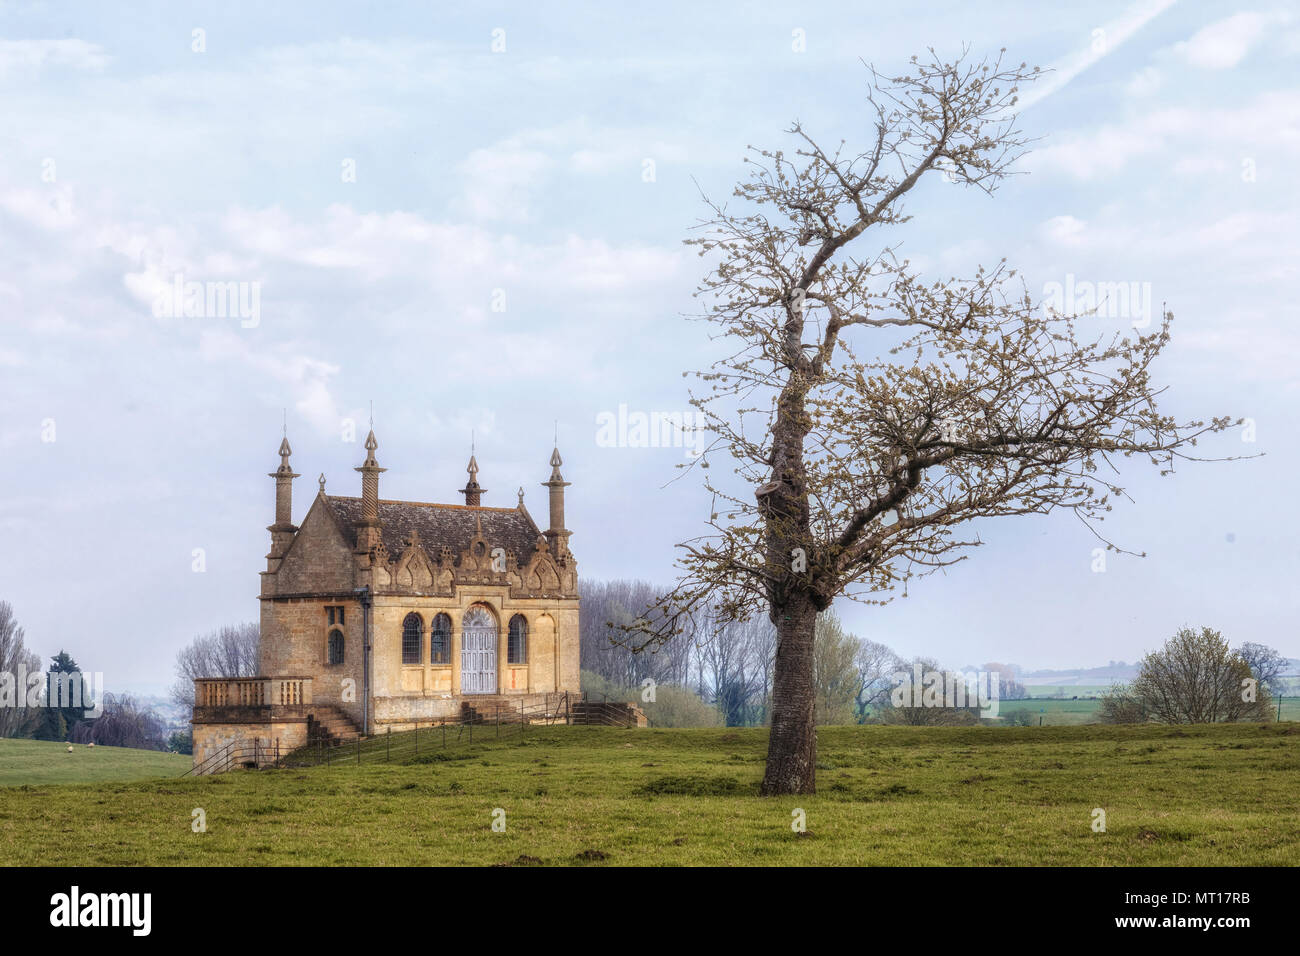 Chipping Campden, Cotswold, Gloucestershire, England, UK Stock Photo